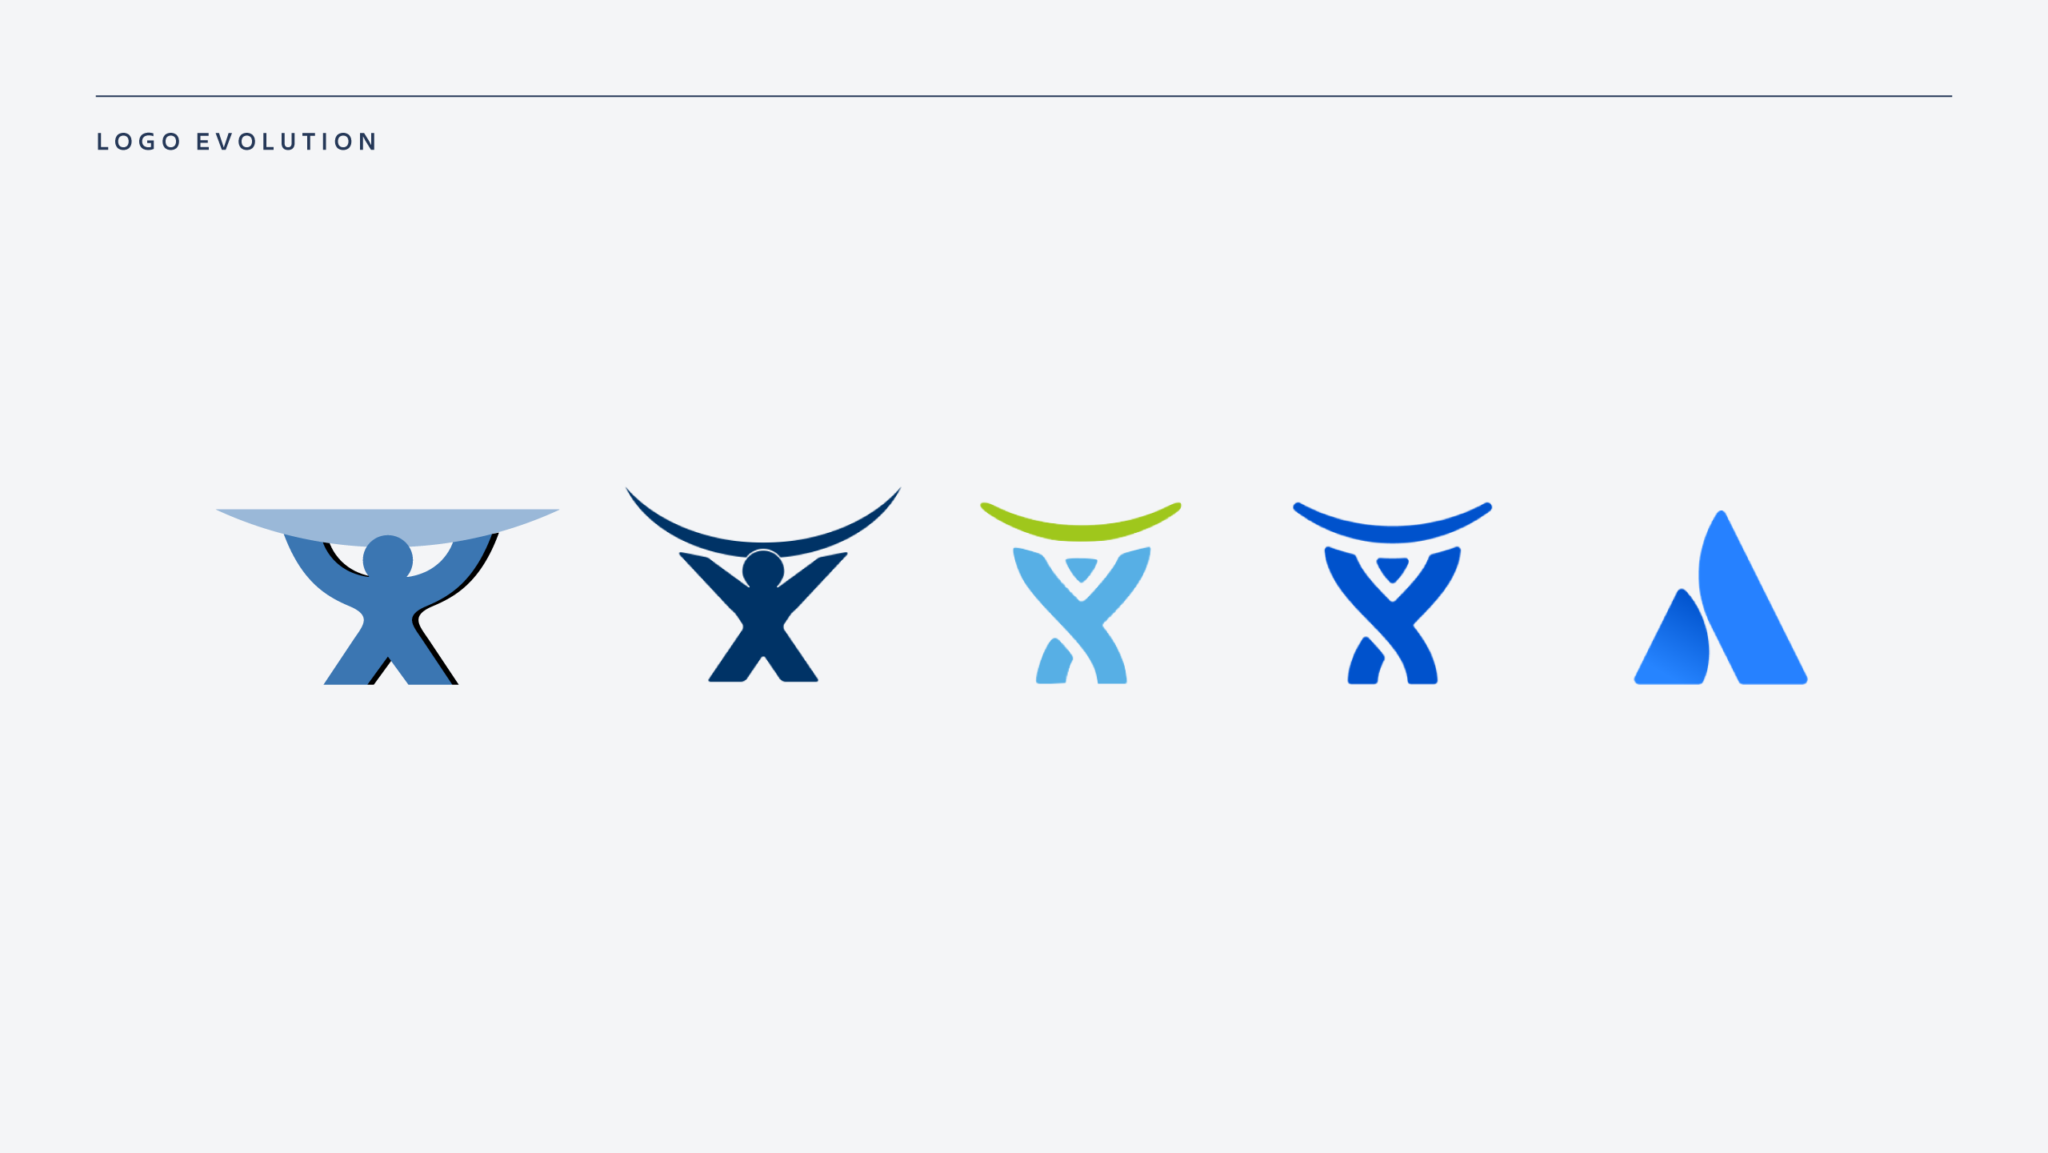 Atlassian Rebrands with a Bold New Look